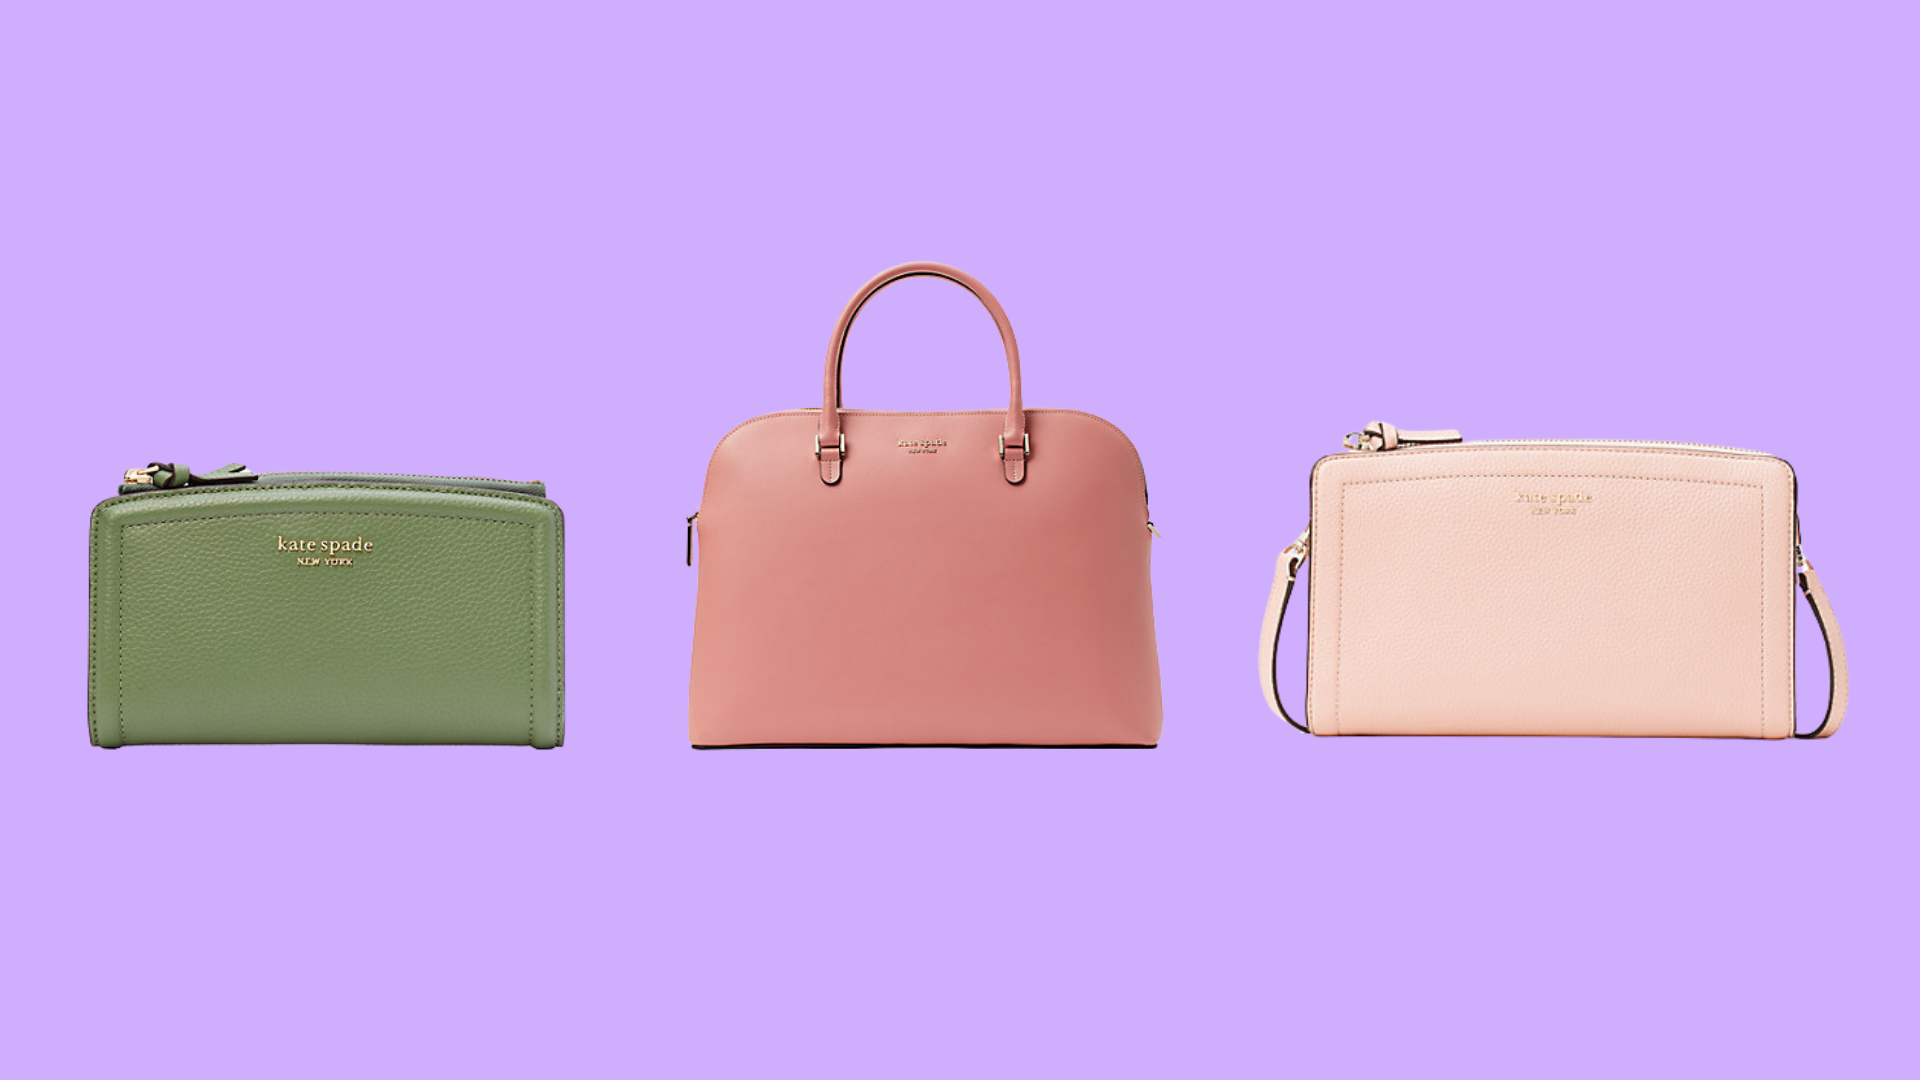 Kate Spade purse: Take 25% off full-price styles with this code